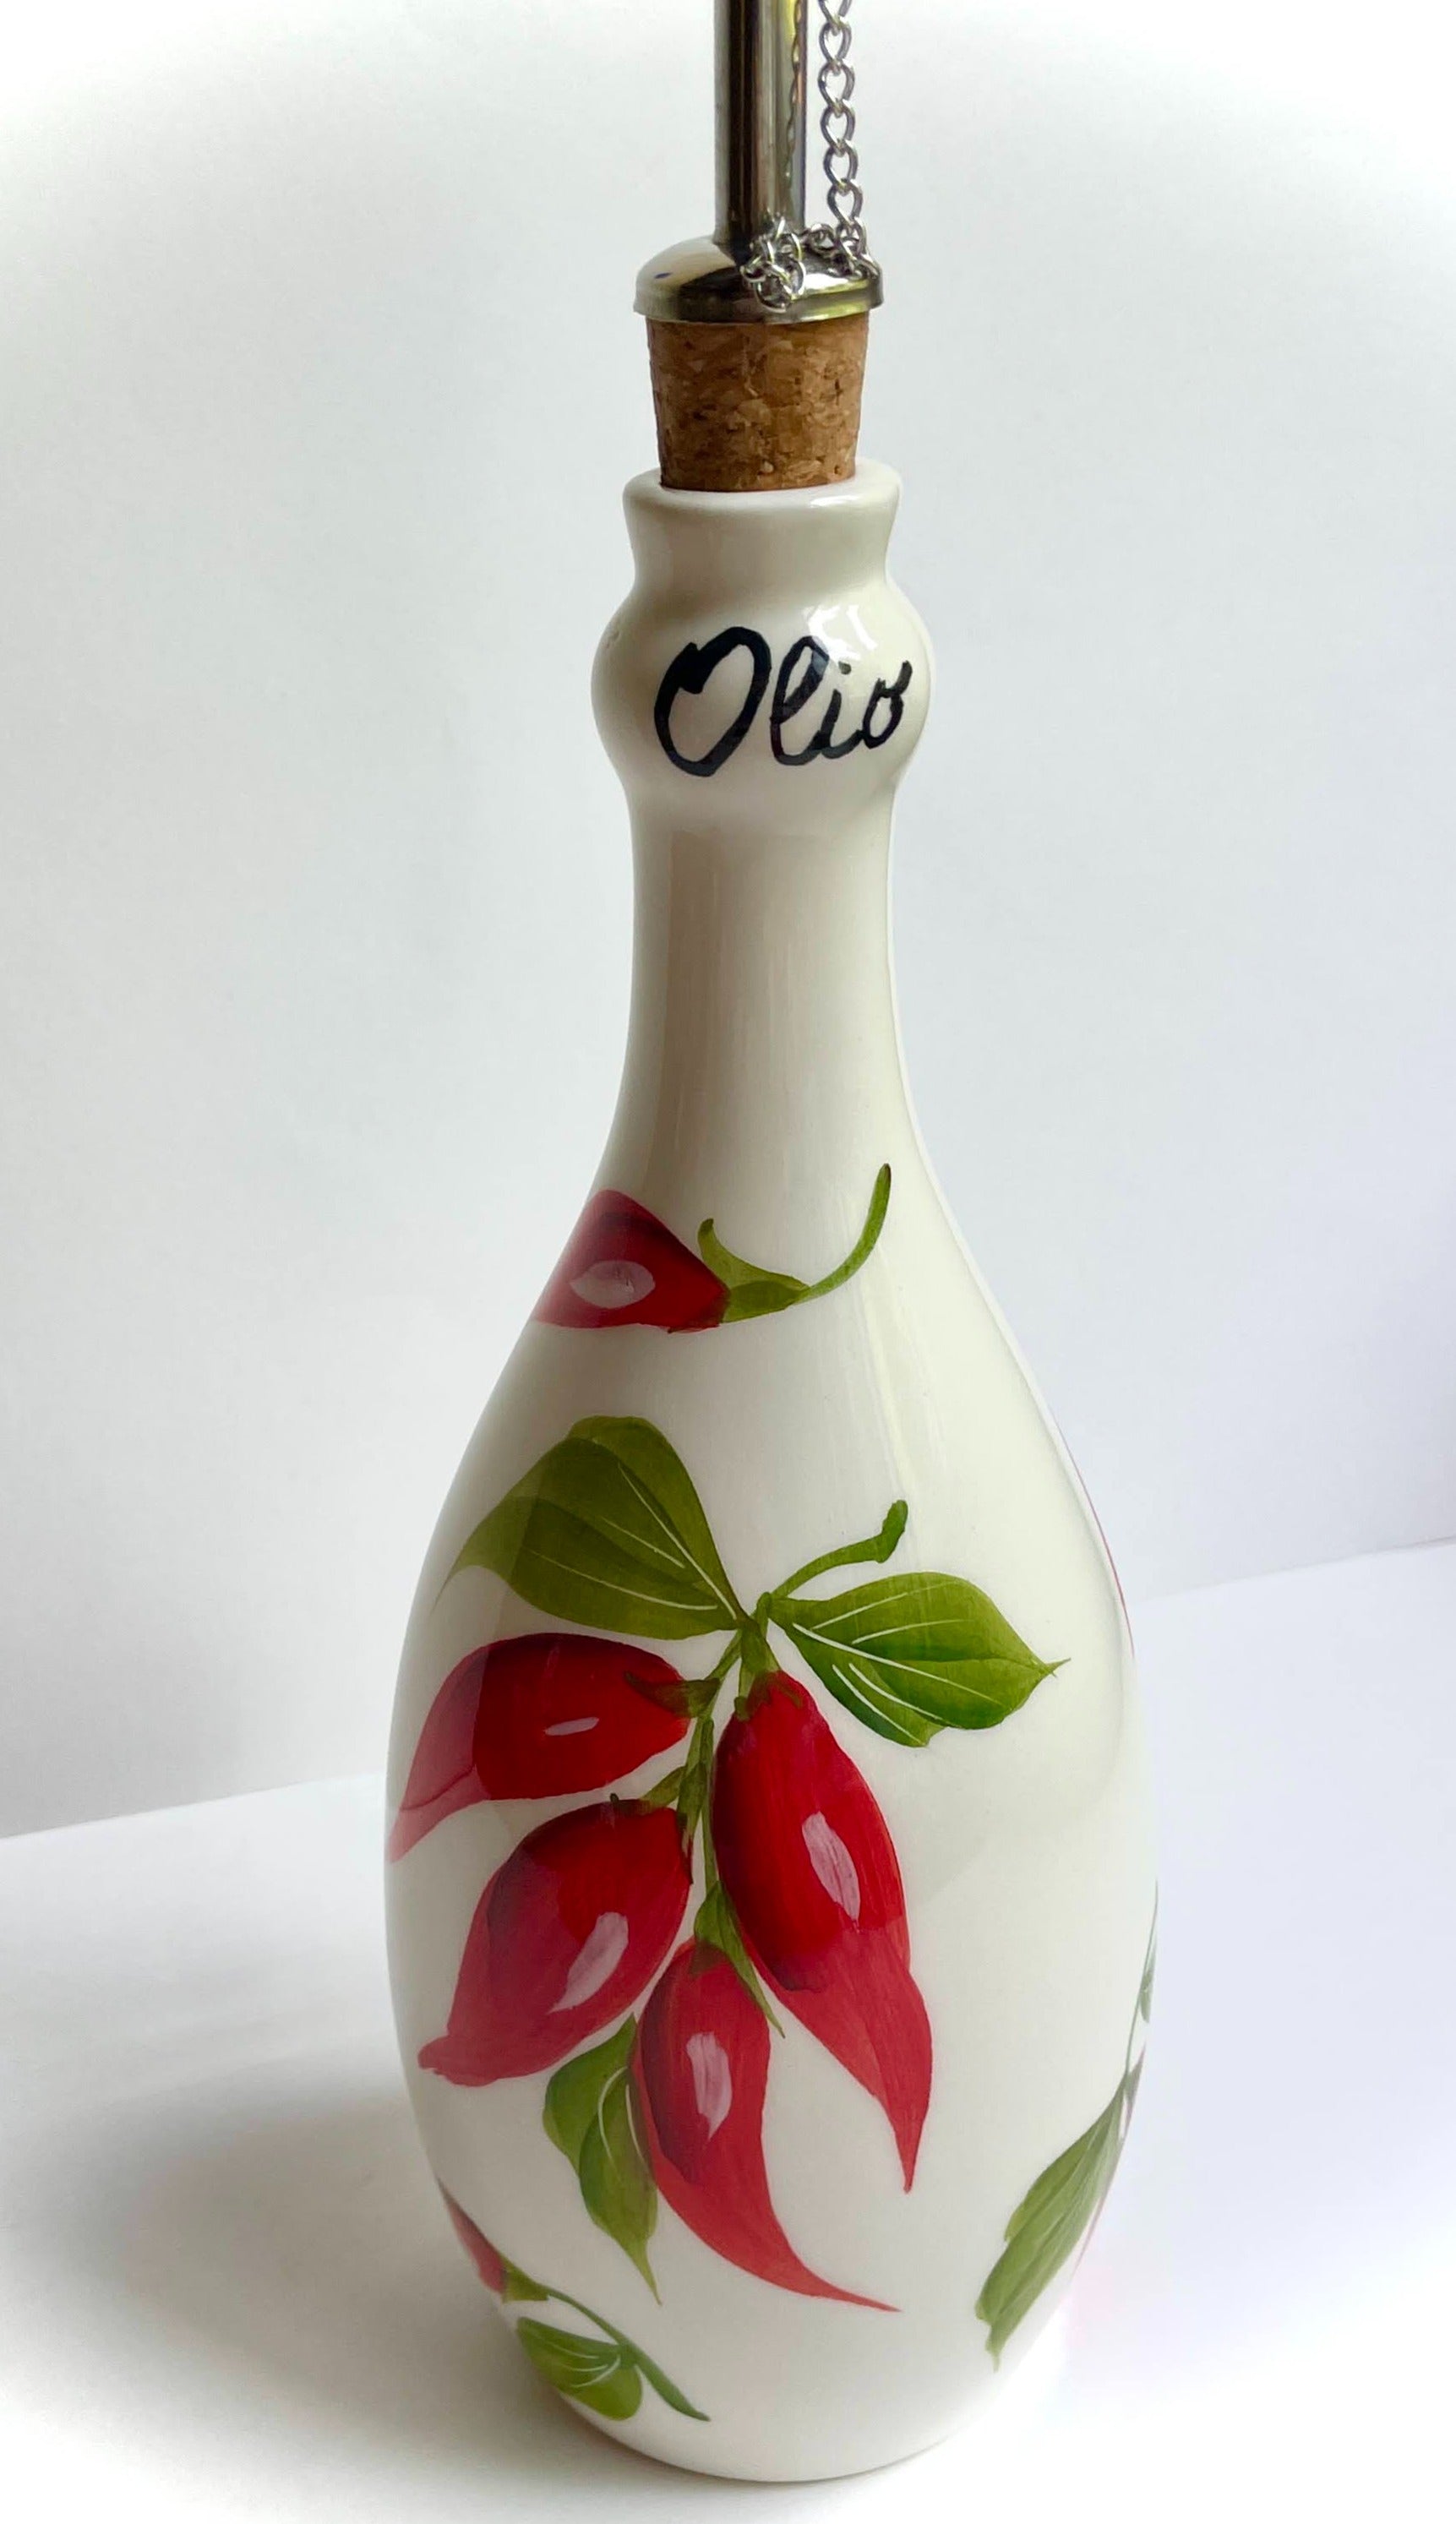 Chili Peppers Olive Oil Bottle